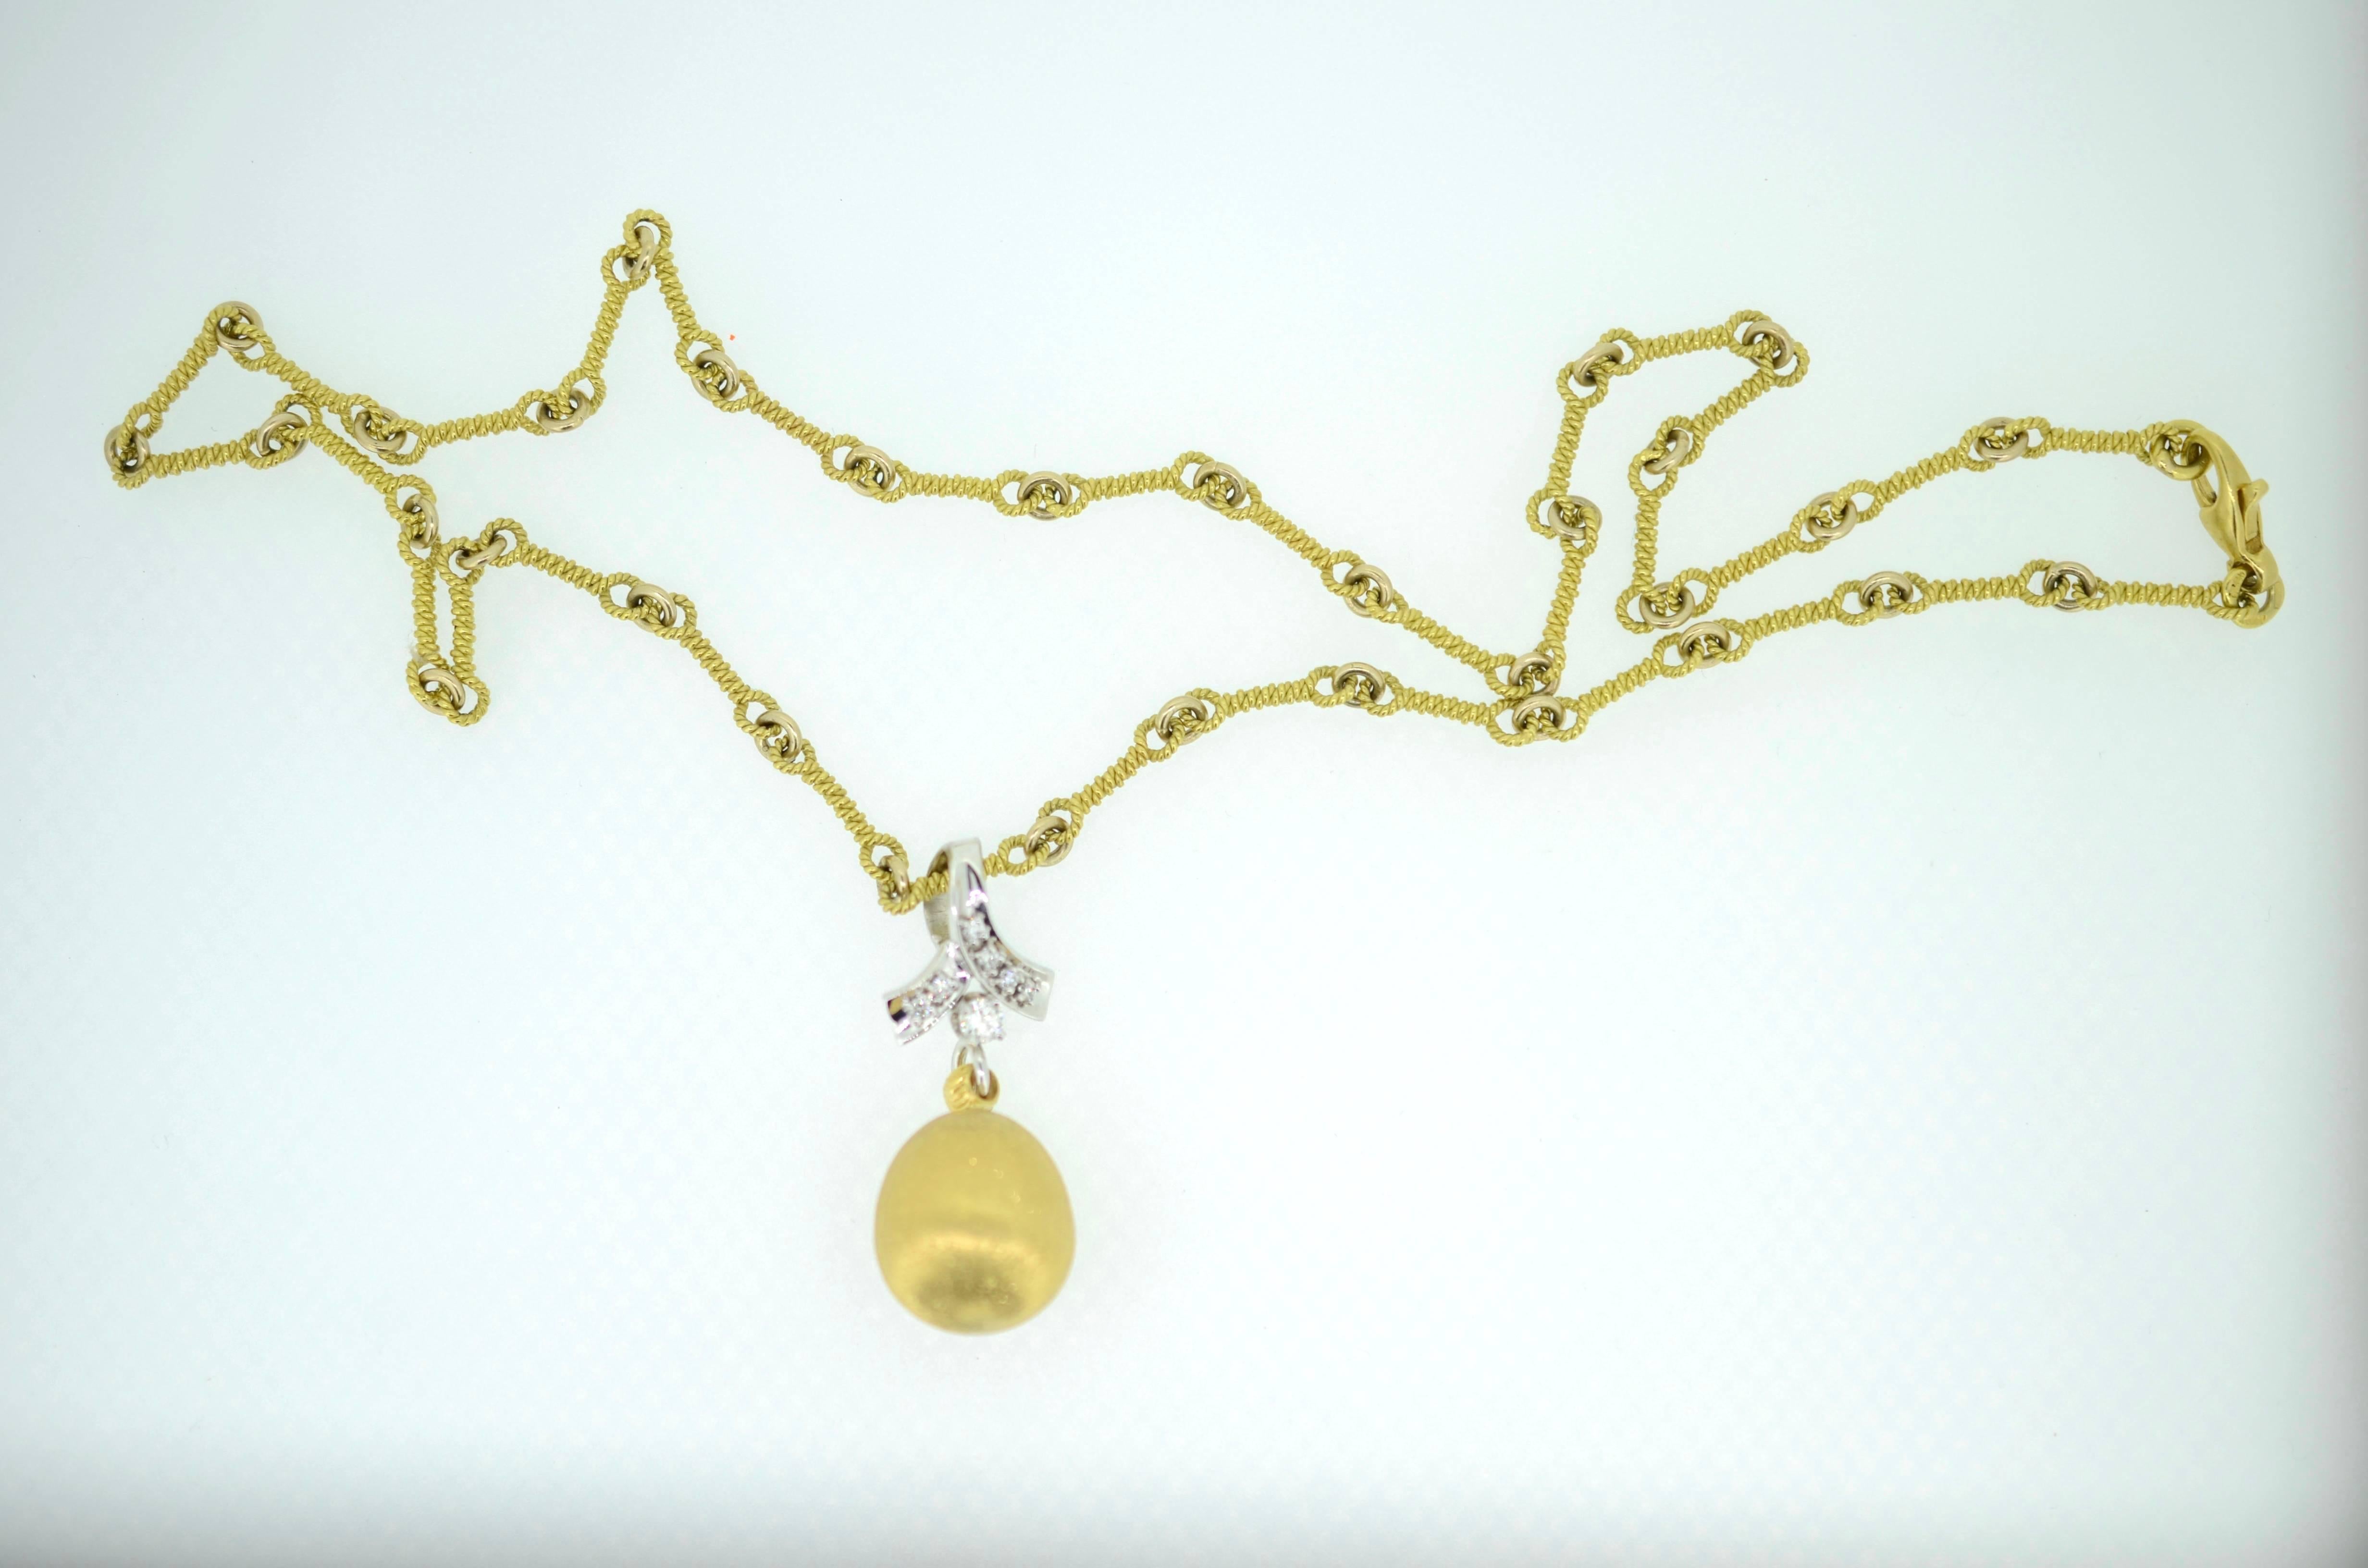 Elegant one of a kind hand made 18kt yellow gold and 14kt white gold and diamond neckpiece. Sphere is hand made 14.8 grams, 18mm in 18kt yellow gold. 
Pendant sphere is 18kt yellow gold, textured full dimension with 14kt white gold ribbon set with